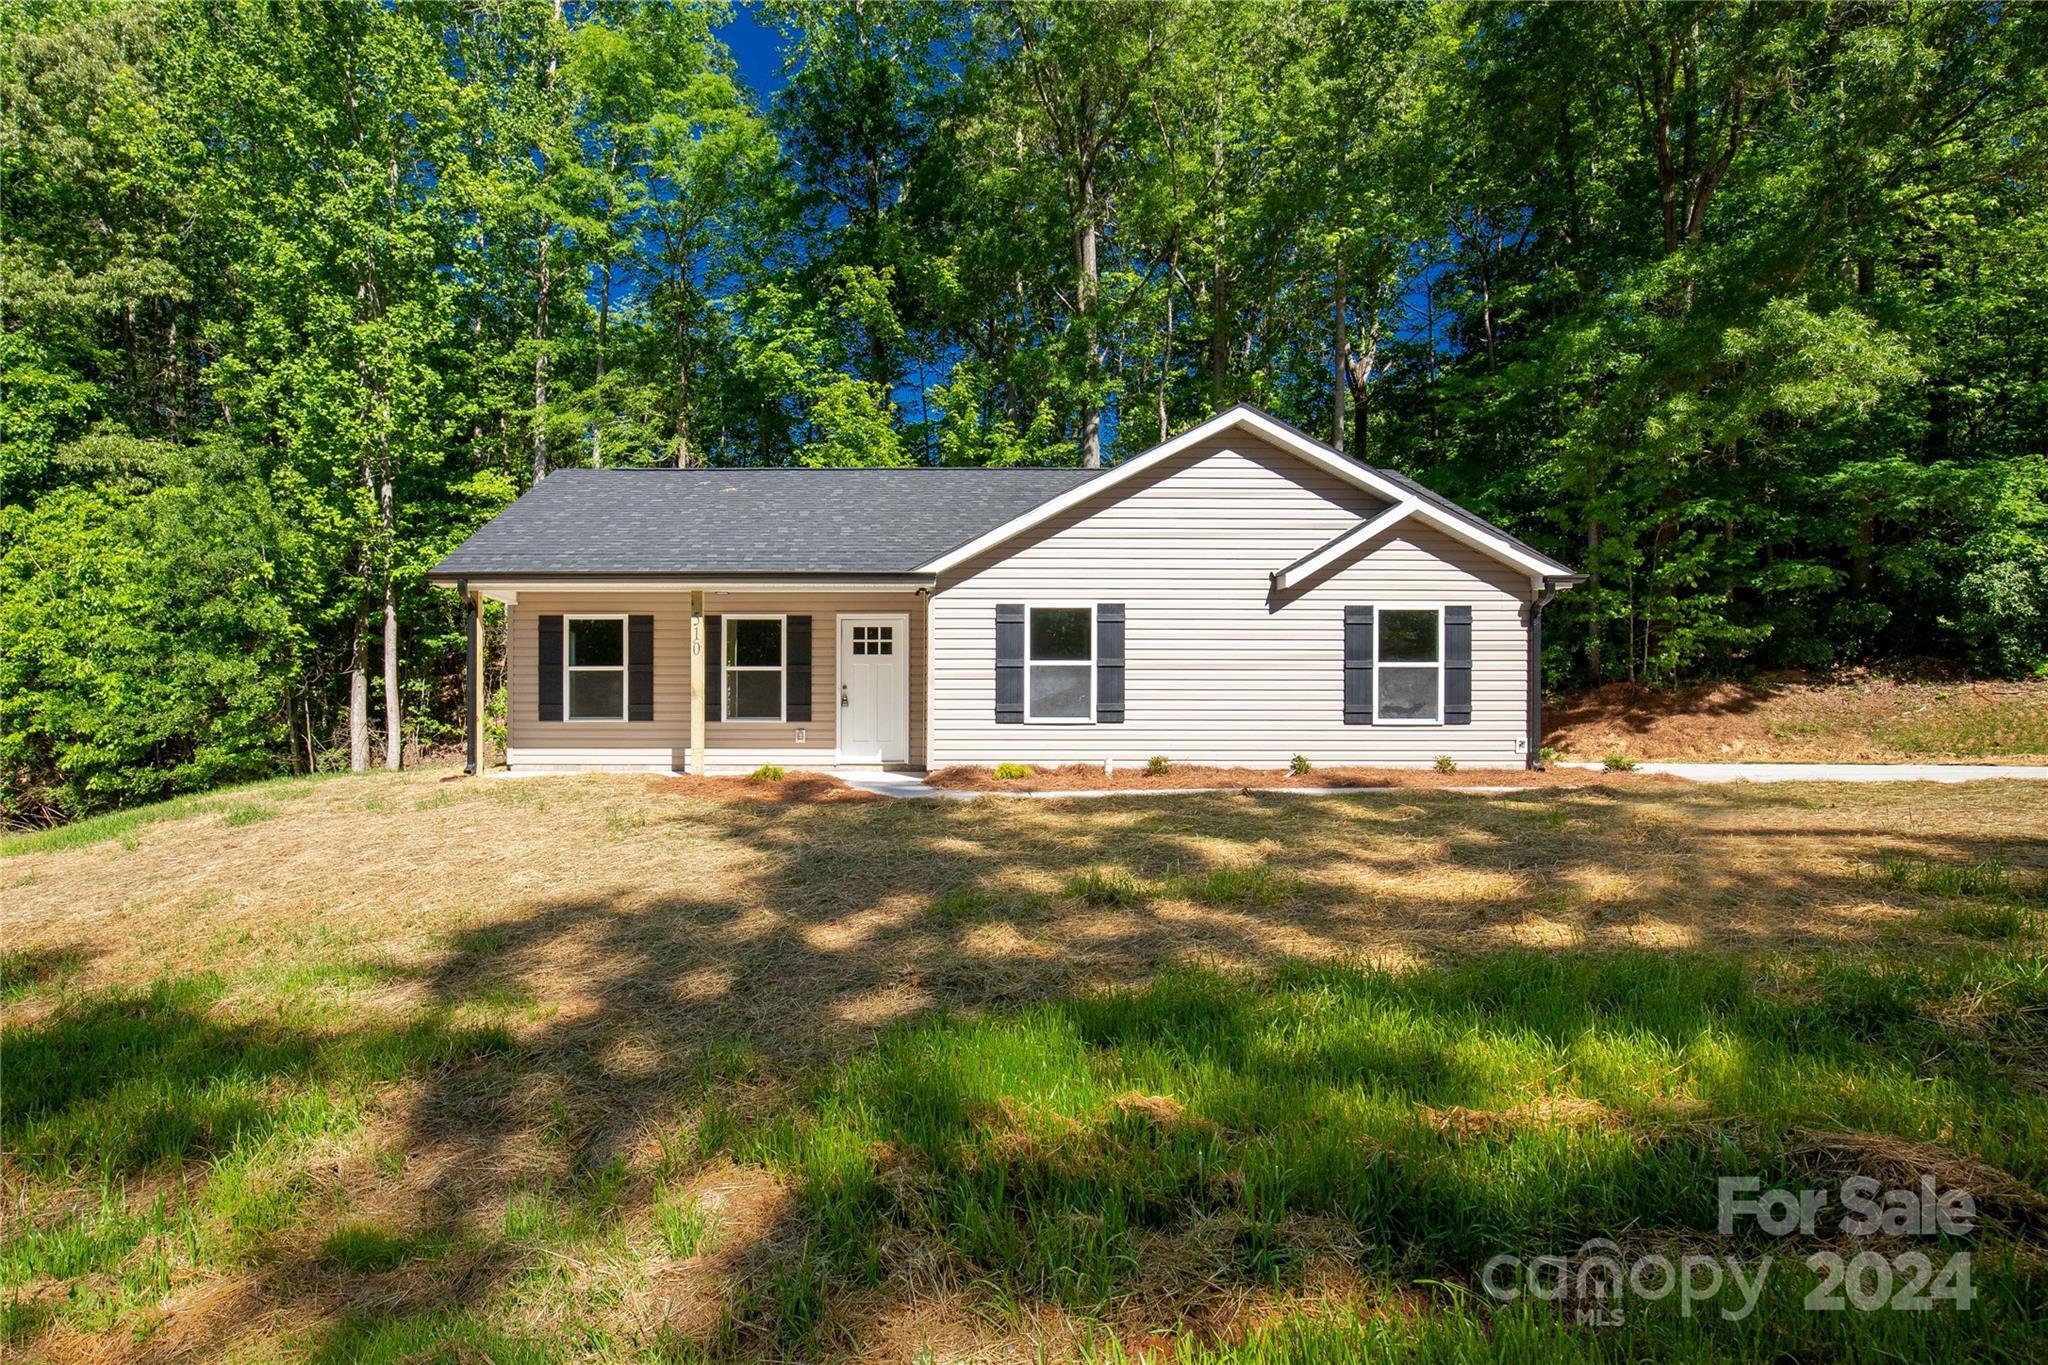 Photo one of 510 Railroad Ave York SC 29745 | MLS 4114072